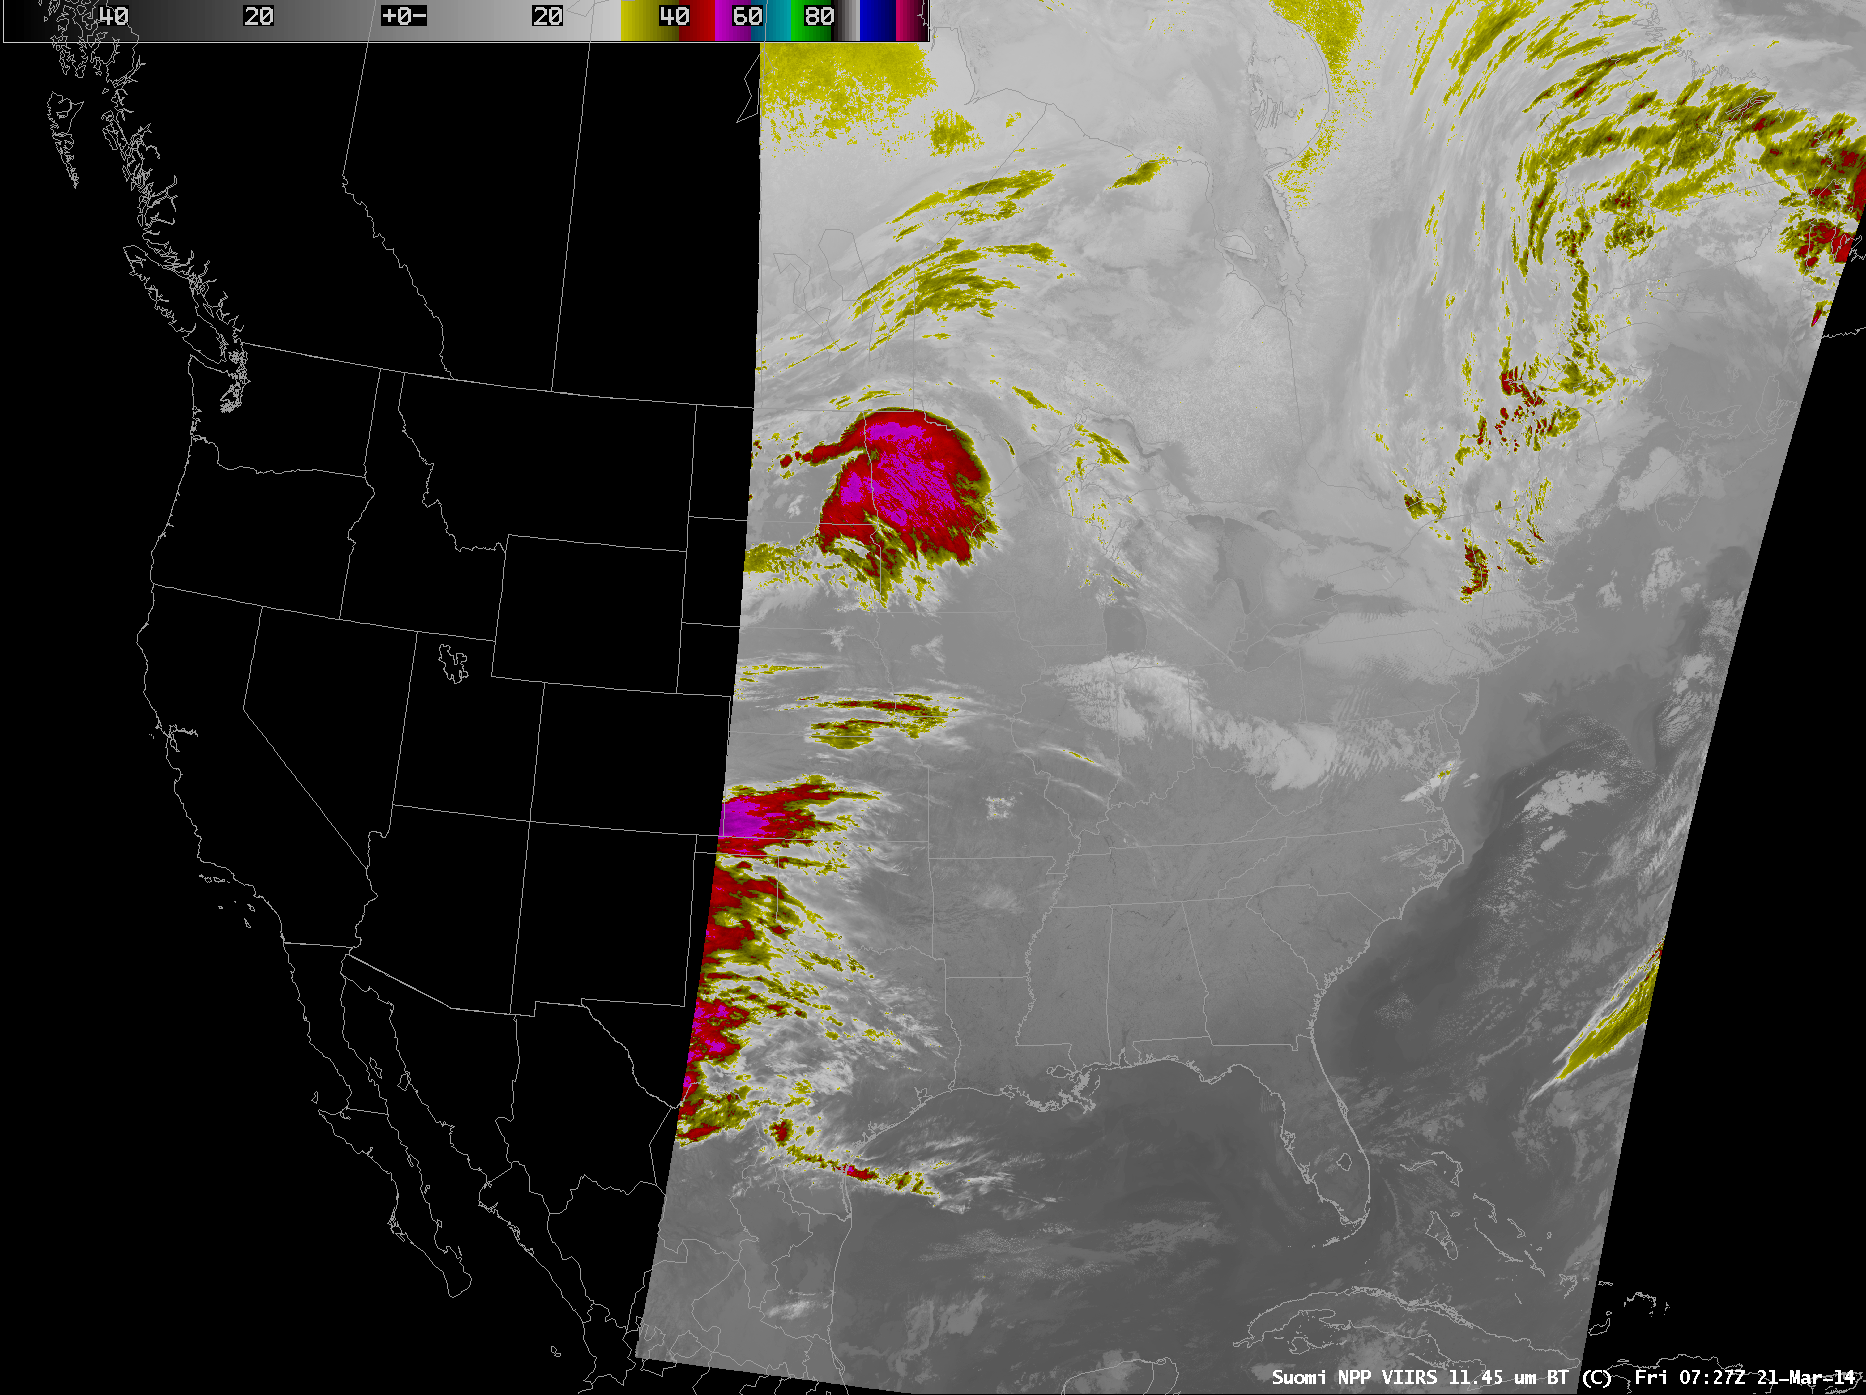 Suomi NPP VIIRS Sea Surface Temperature product flowing into AWIPS ...